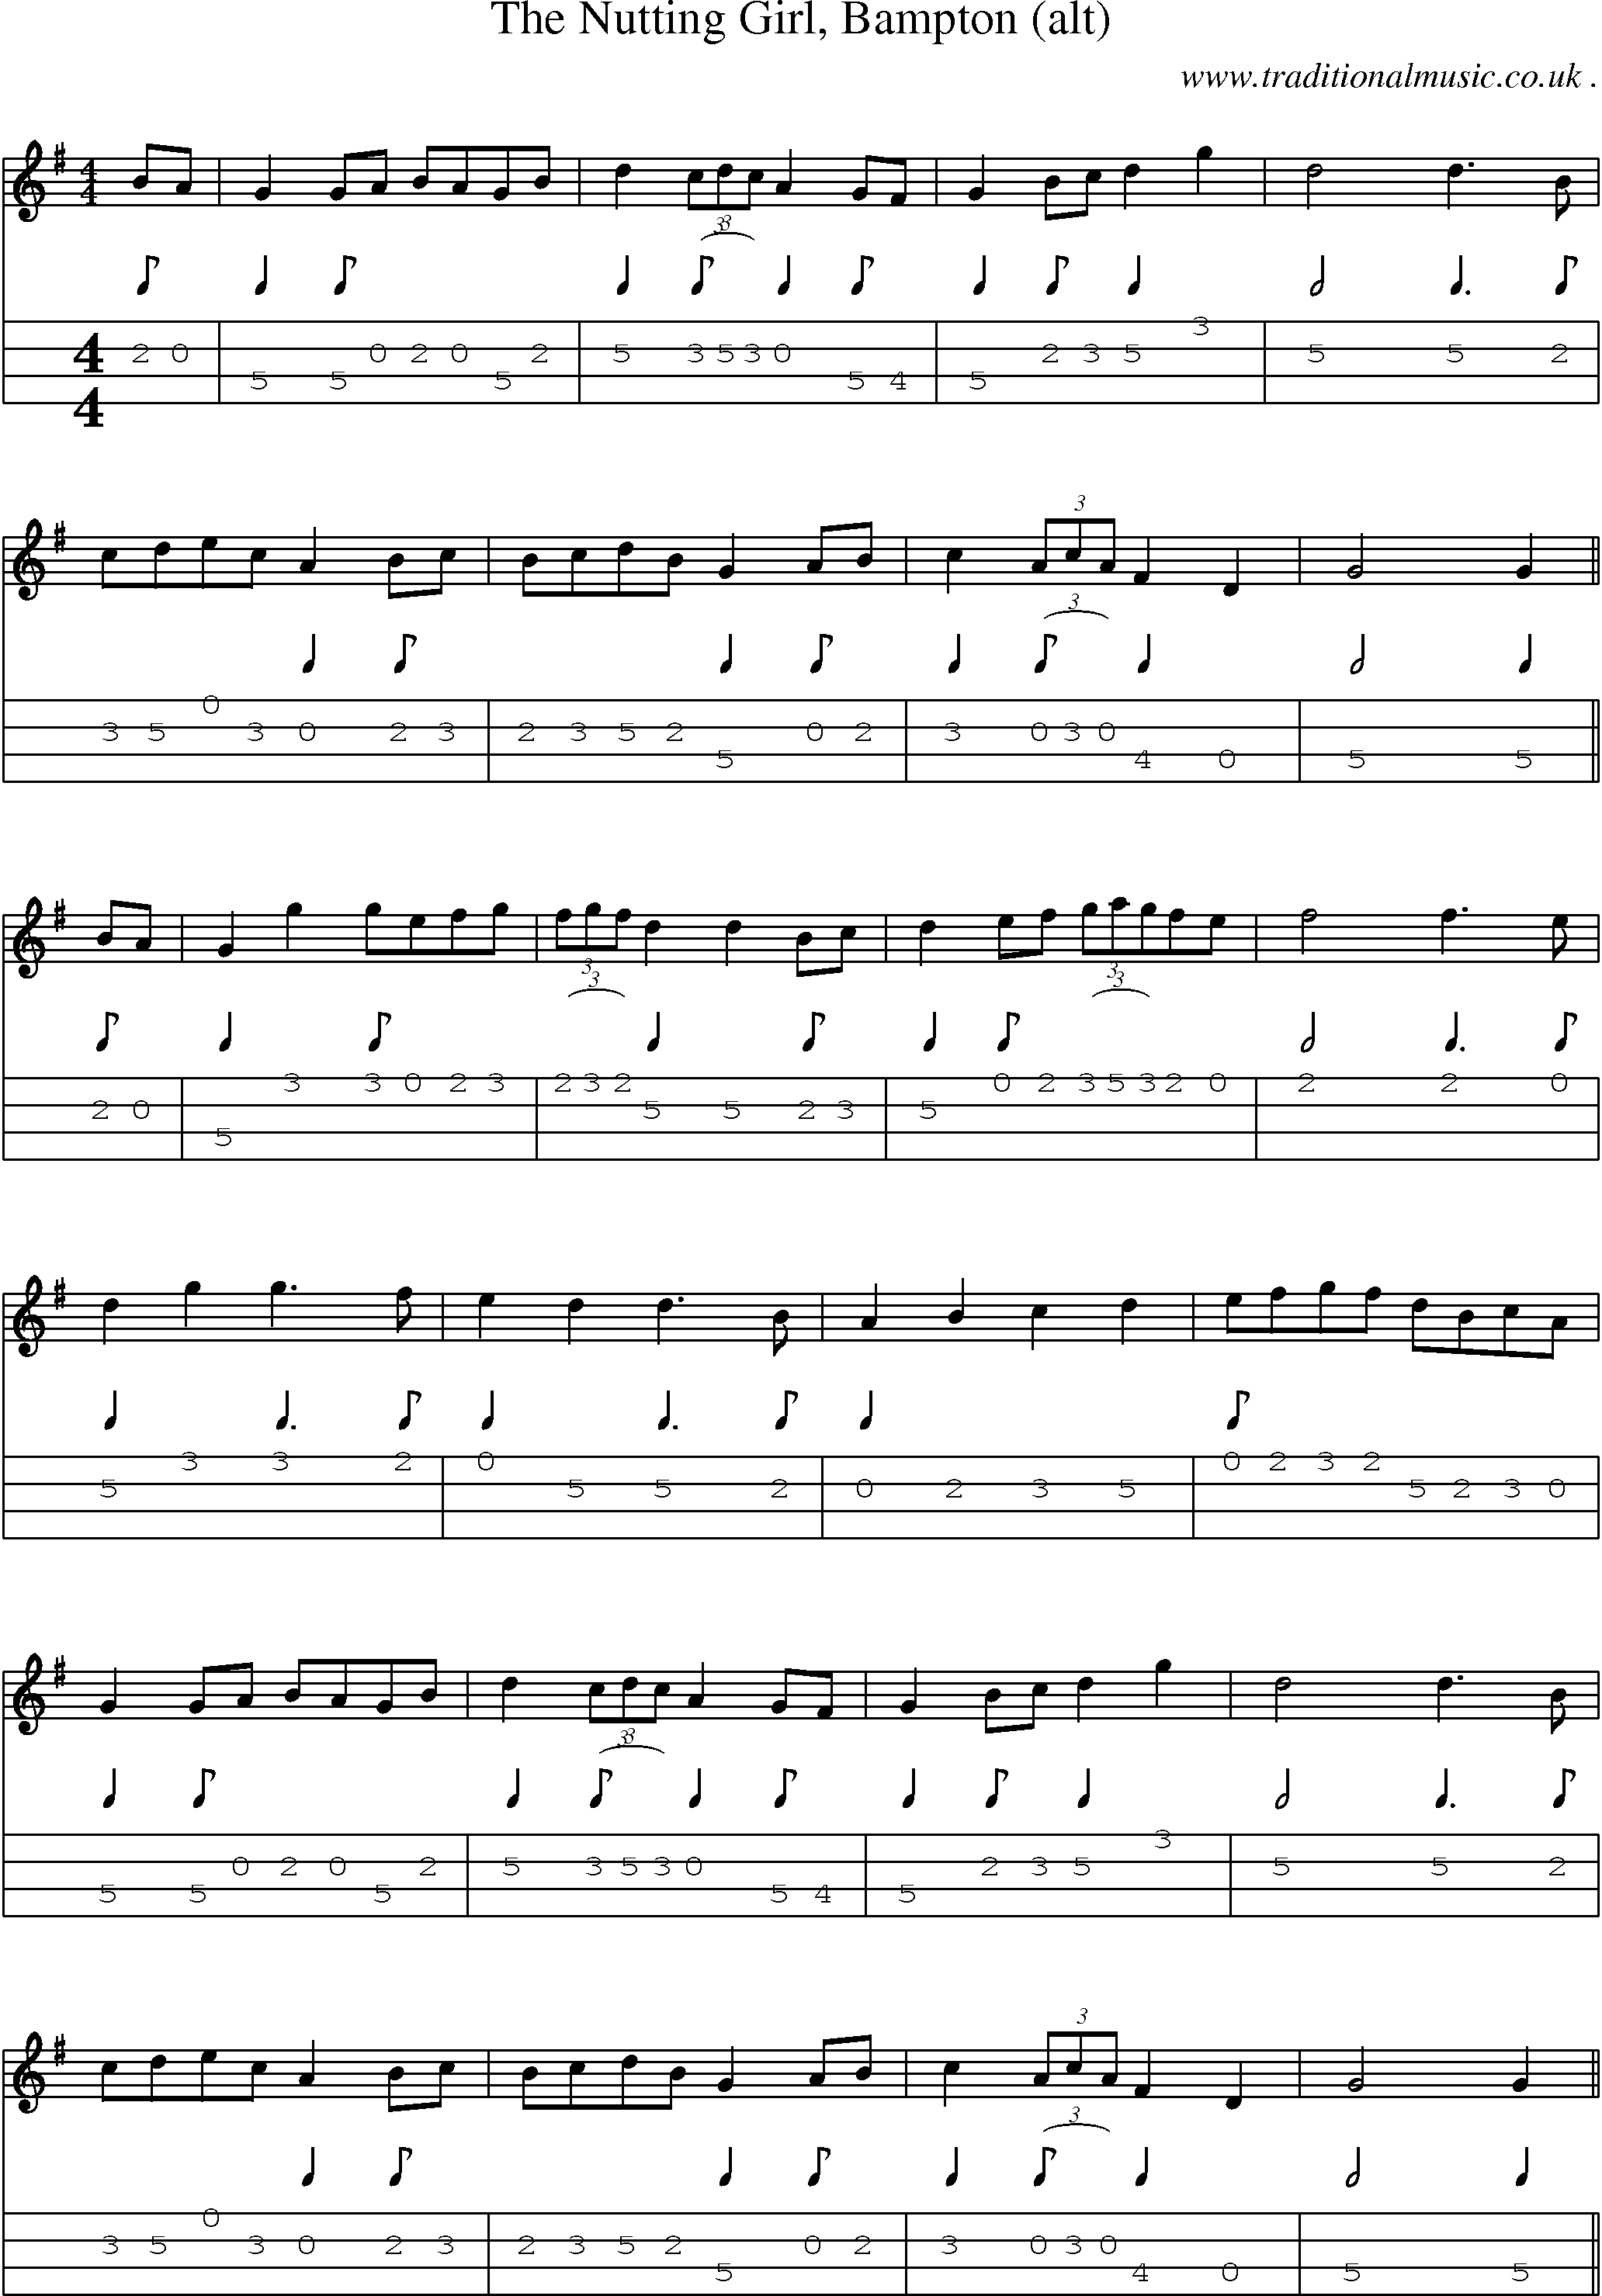 Sheet-Music and Mandolin Tabs for The Nutting Girl Bampton (alt)